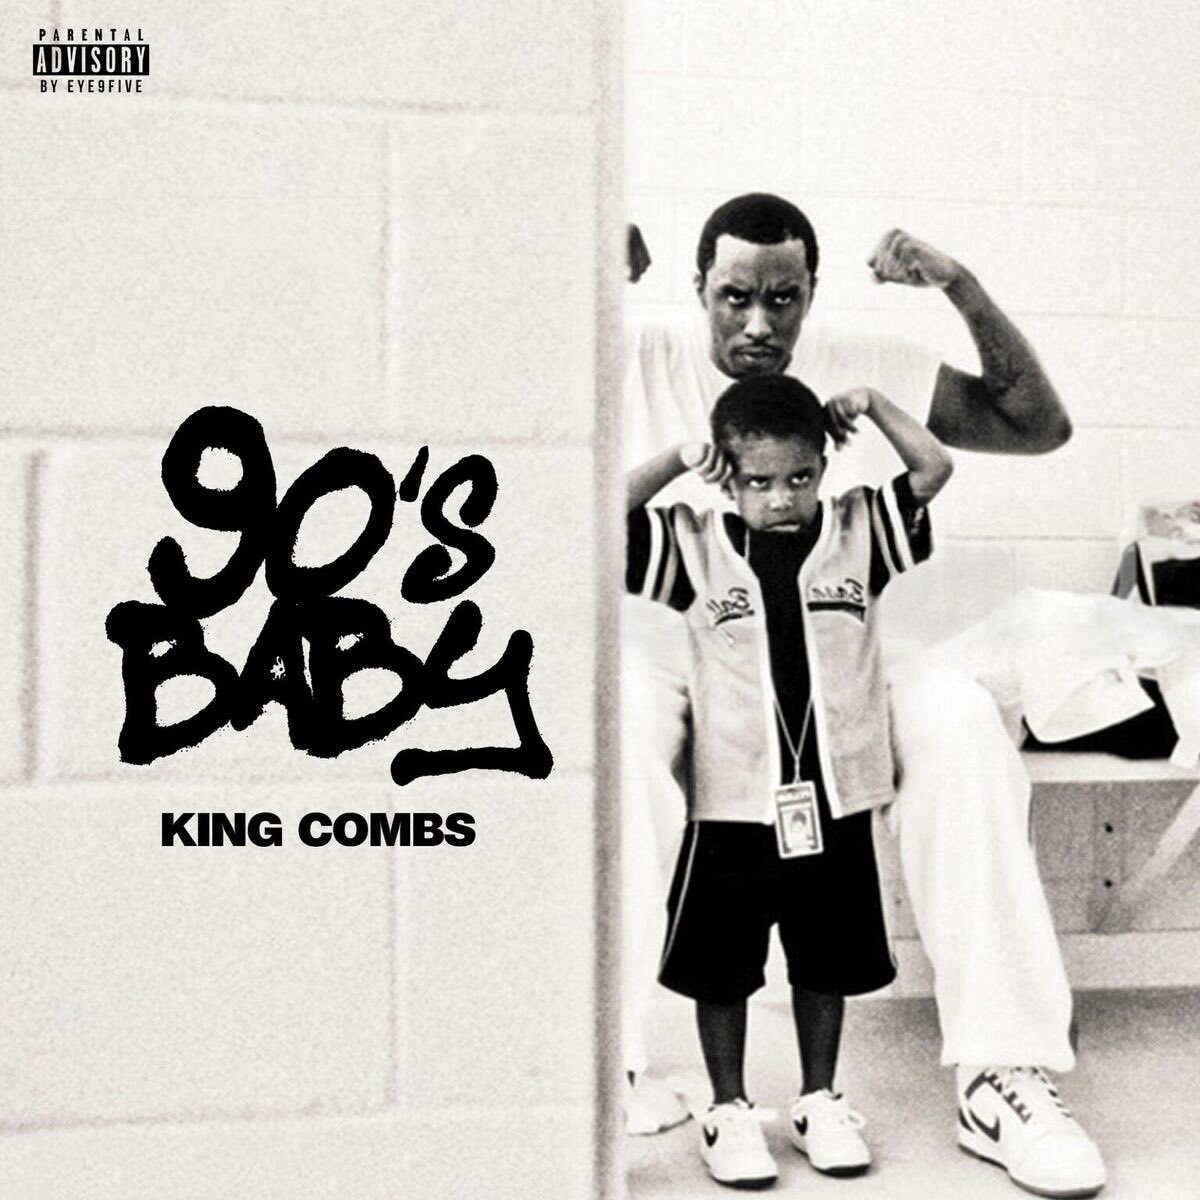 RT @Kingcombs: My first Mixtape 90’s Baby OUT NOW !! ???? 
https://t.co/wTmZOK84aL https://t.co/YS4PtBQyDs